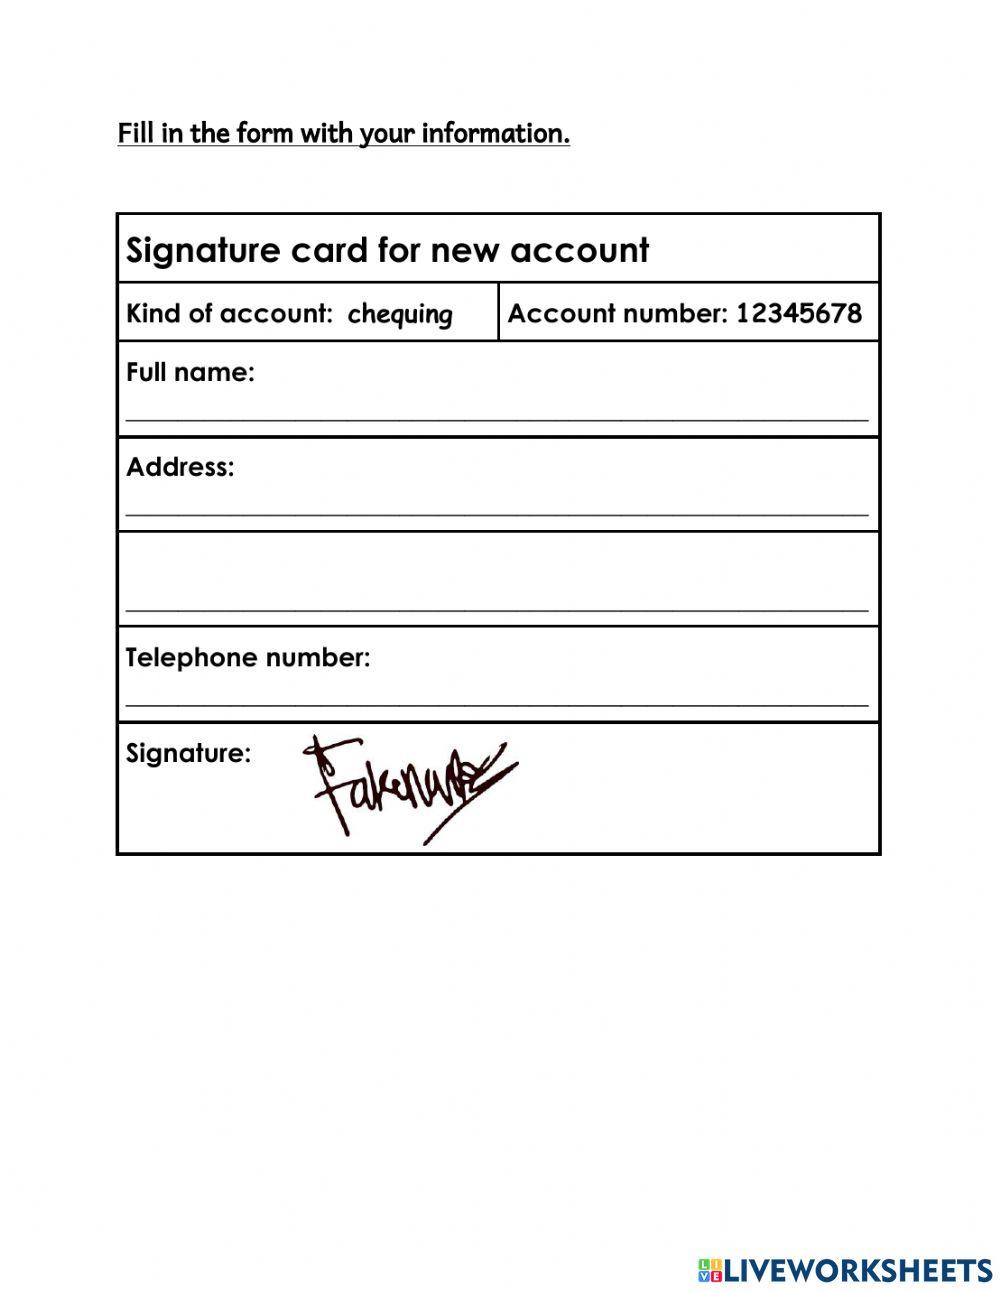 Signature card for new account